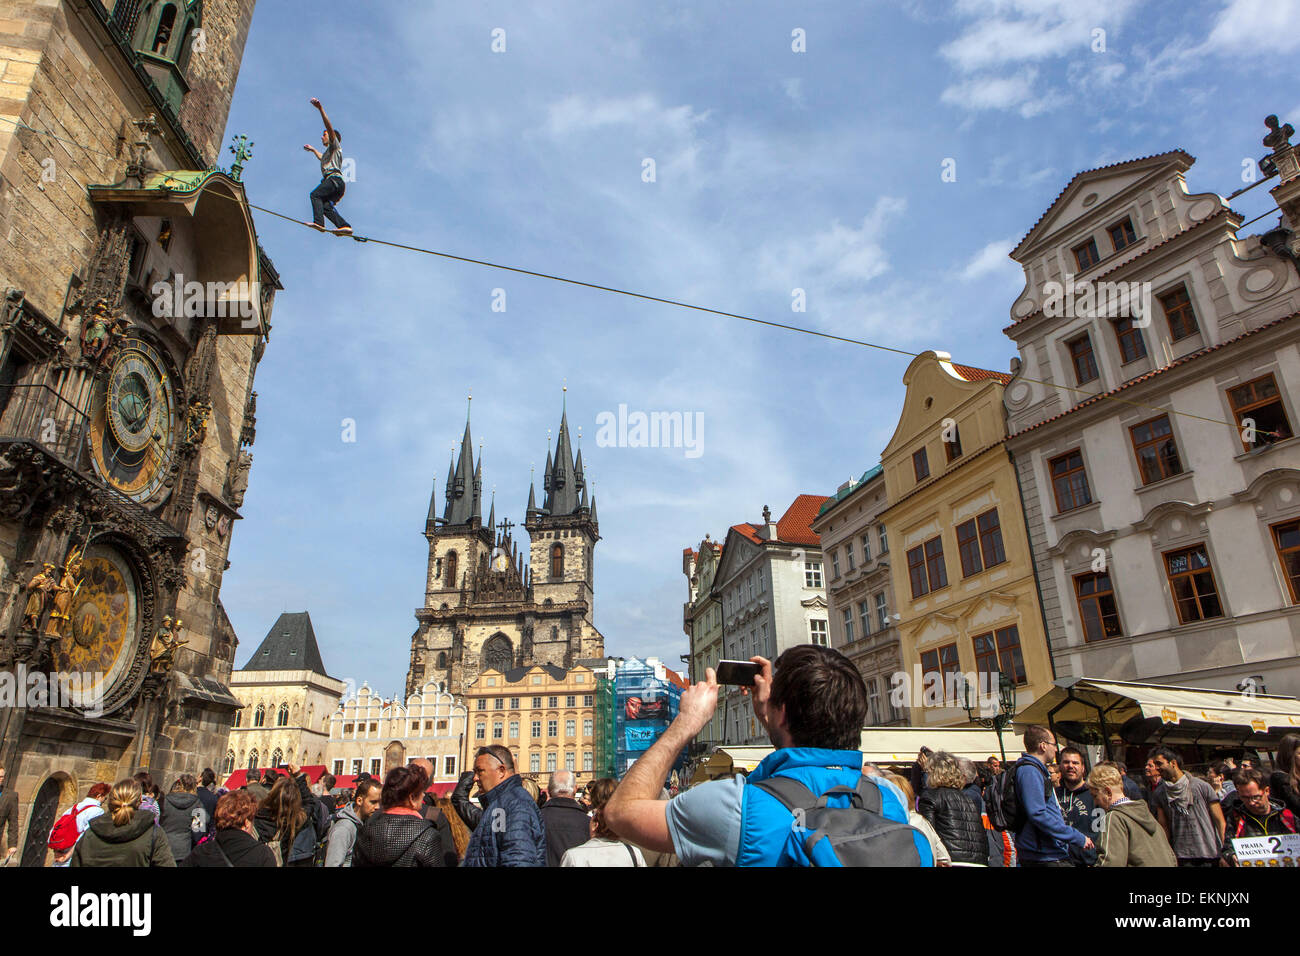 Tightrope walker on the lane in front of the Prague Astronomical Clock, Old Town Square Prague street show overhead Stock Photo